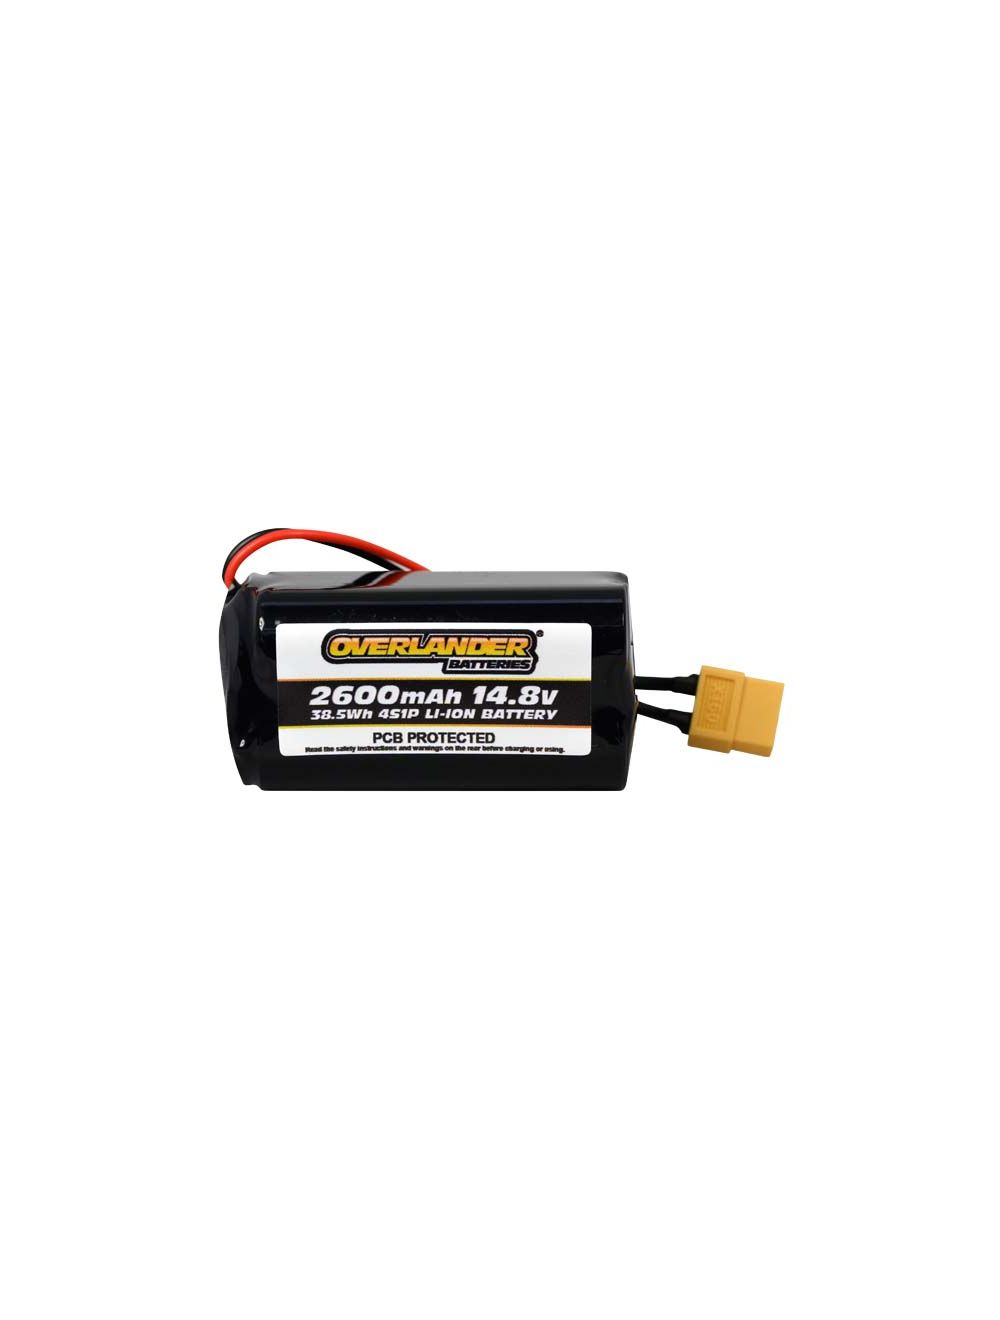 Overlander 2600mAh 4S 14.8V Li-Ion Rechargeable Battery with PCB Square 3301